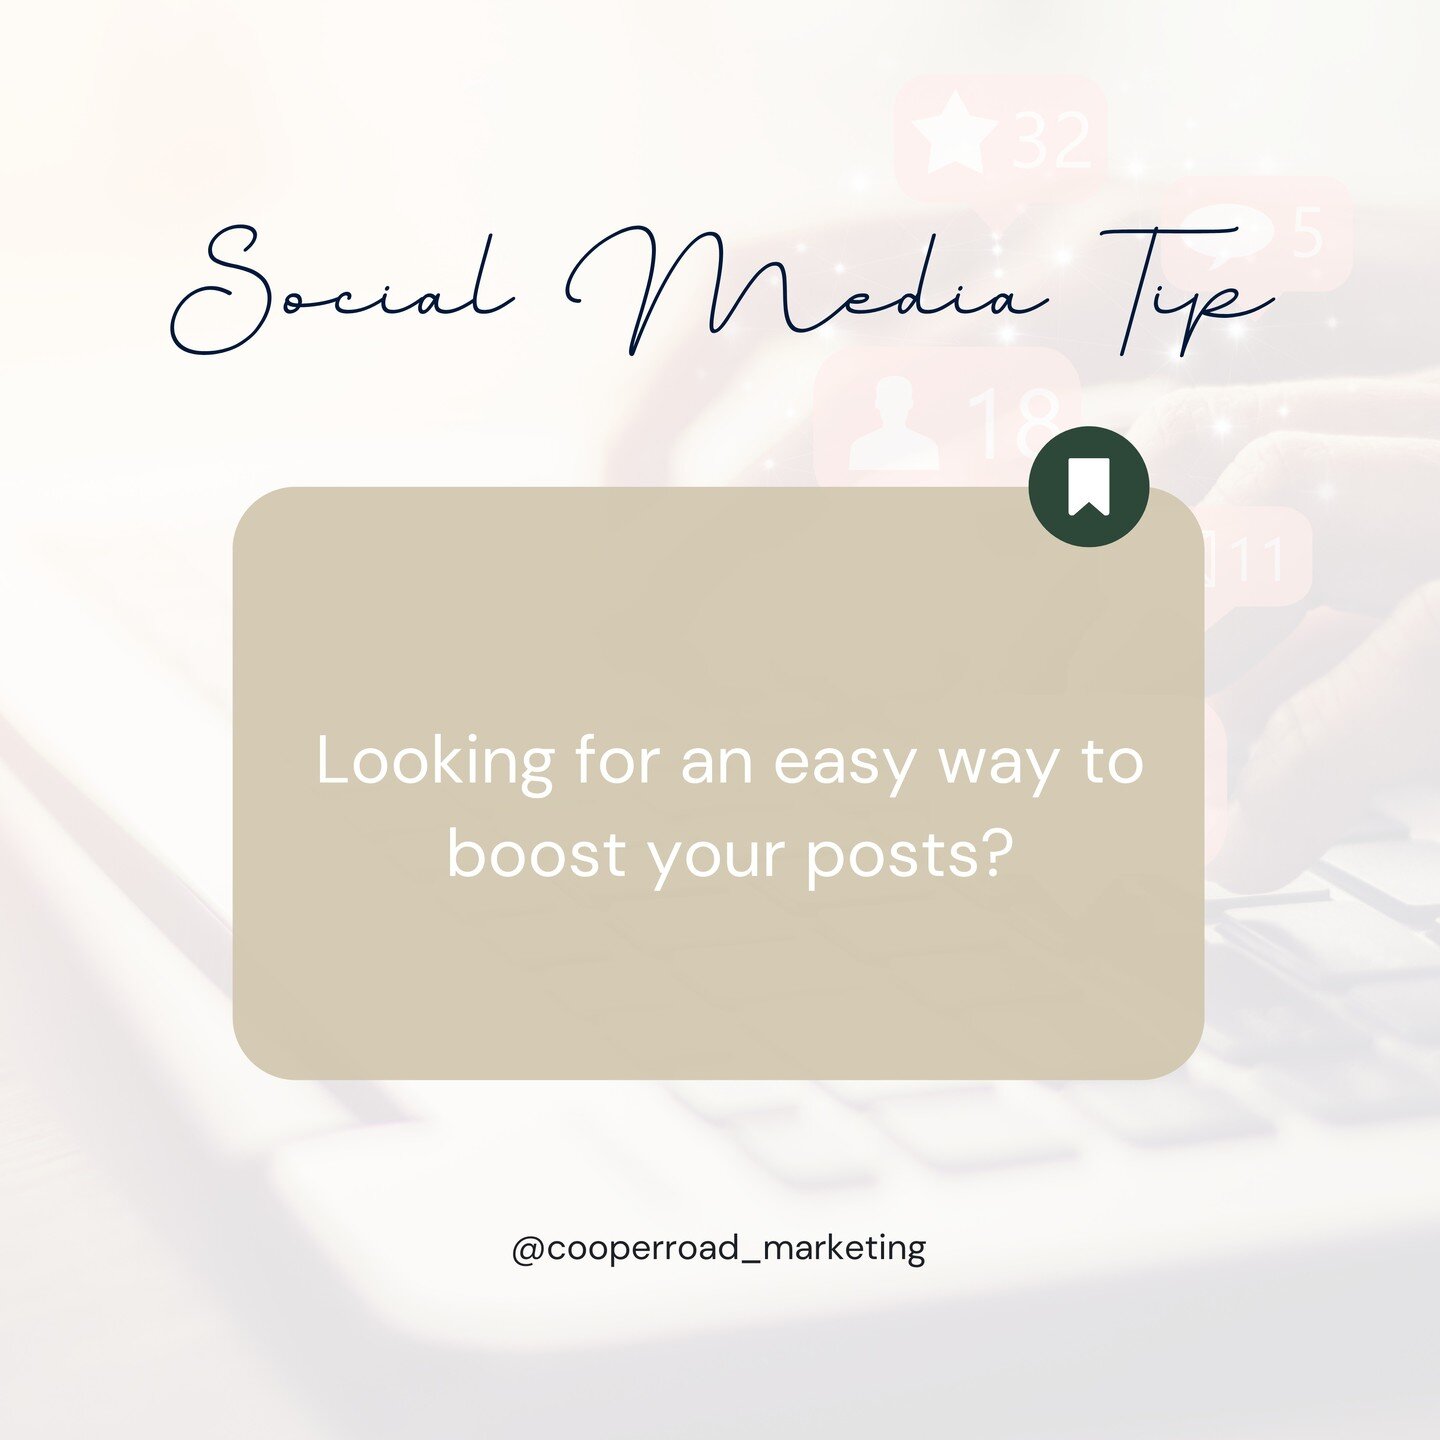 So easy, anyone can do it! The whole point of #socialmedia is to be social, but the #algorithms love it when you're also intentional. Timing your engagement can really boost your return. Give it a try and leave me a comment on your thoughts.👇
.
.
#m